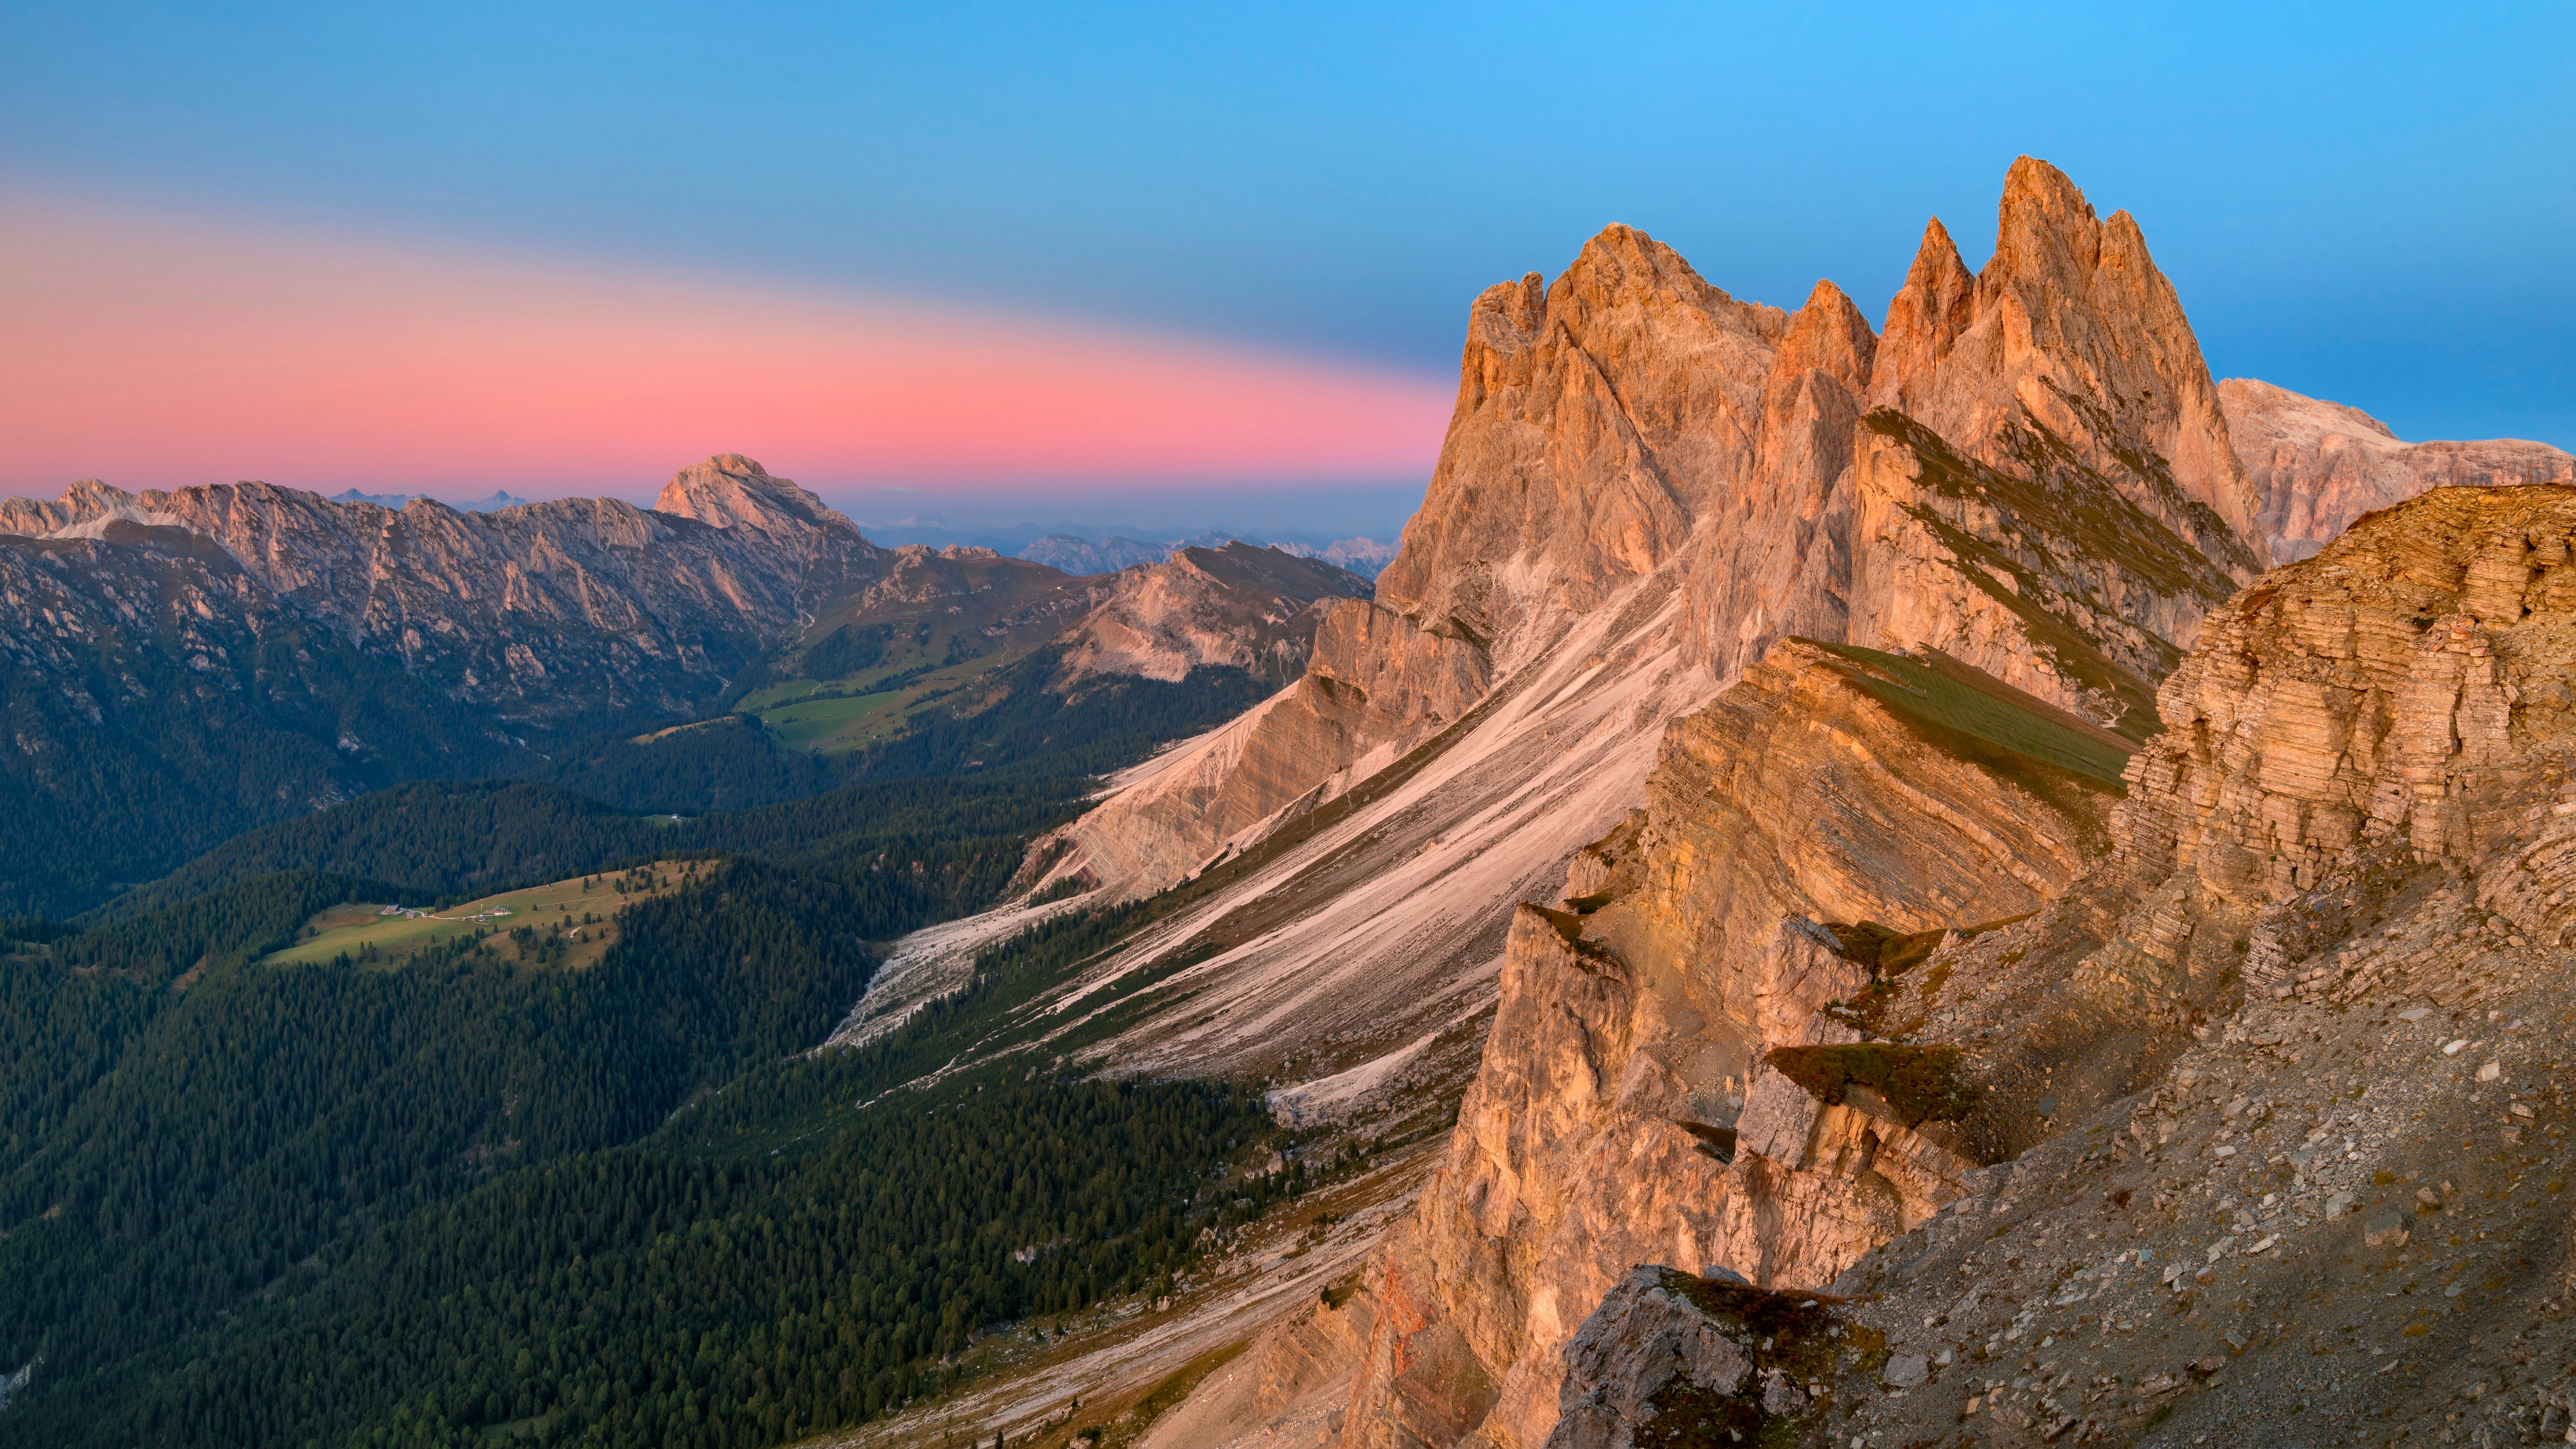 General 5120x2880 nature landscape mountains sky Dolomites Italy